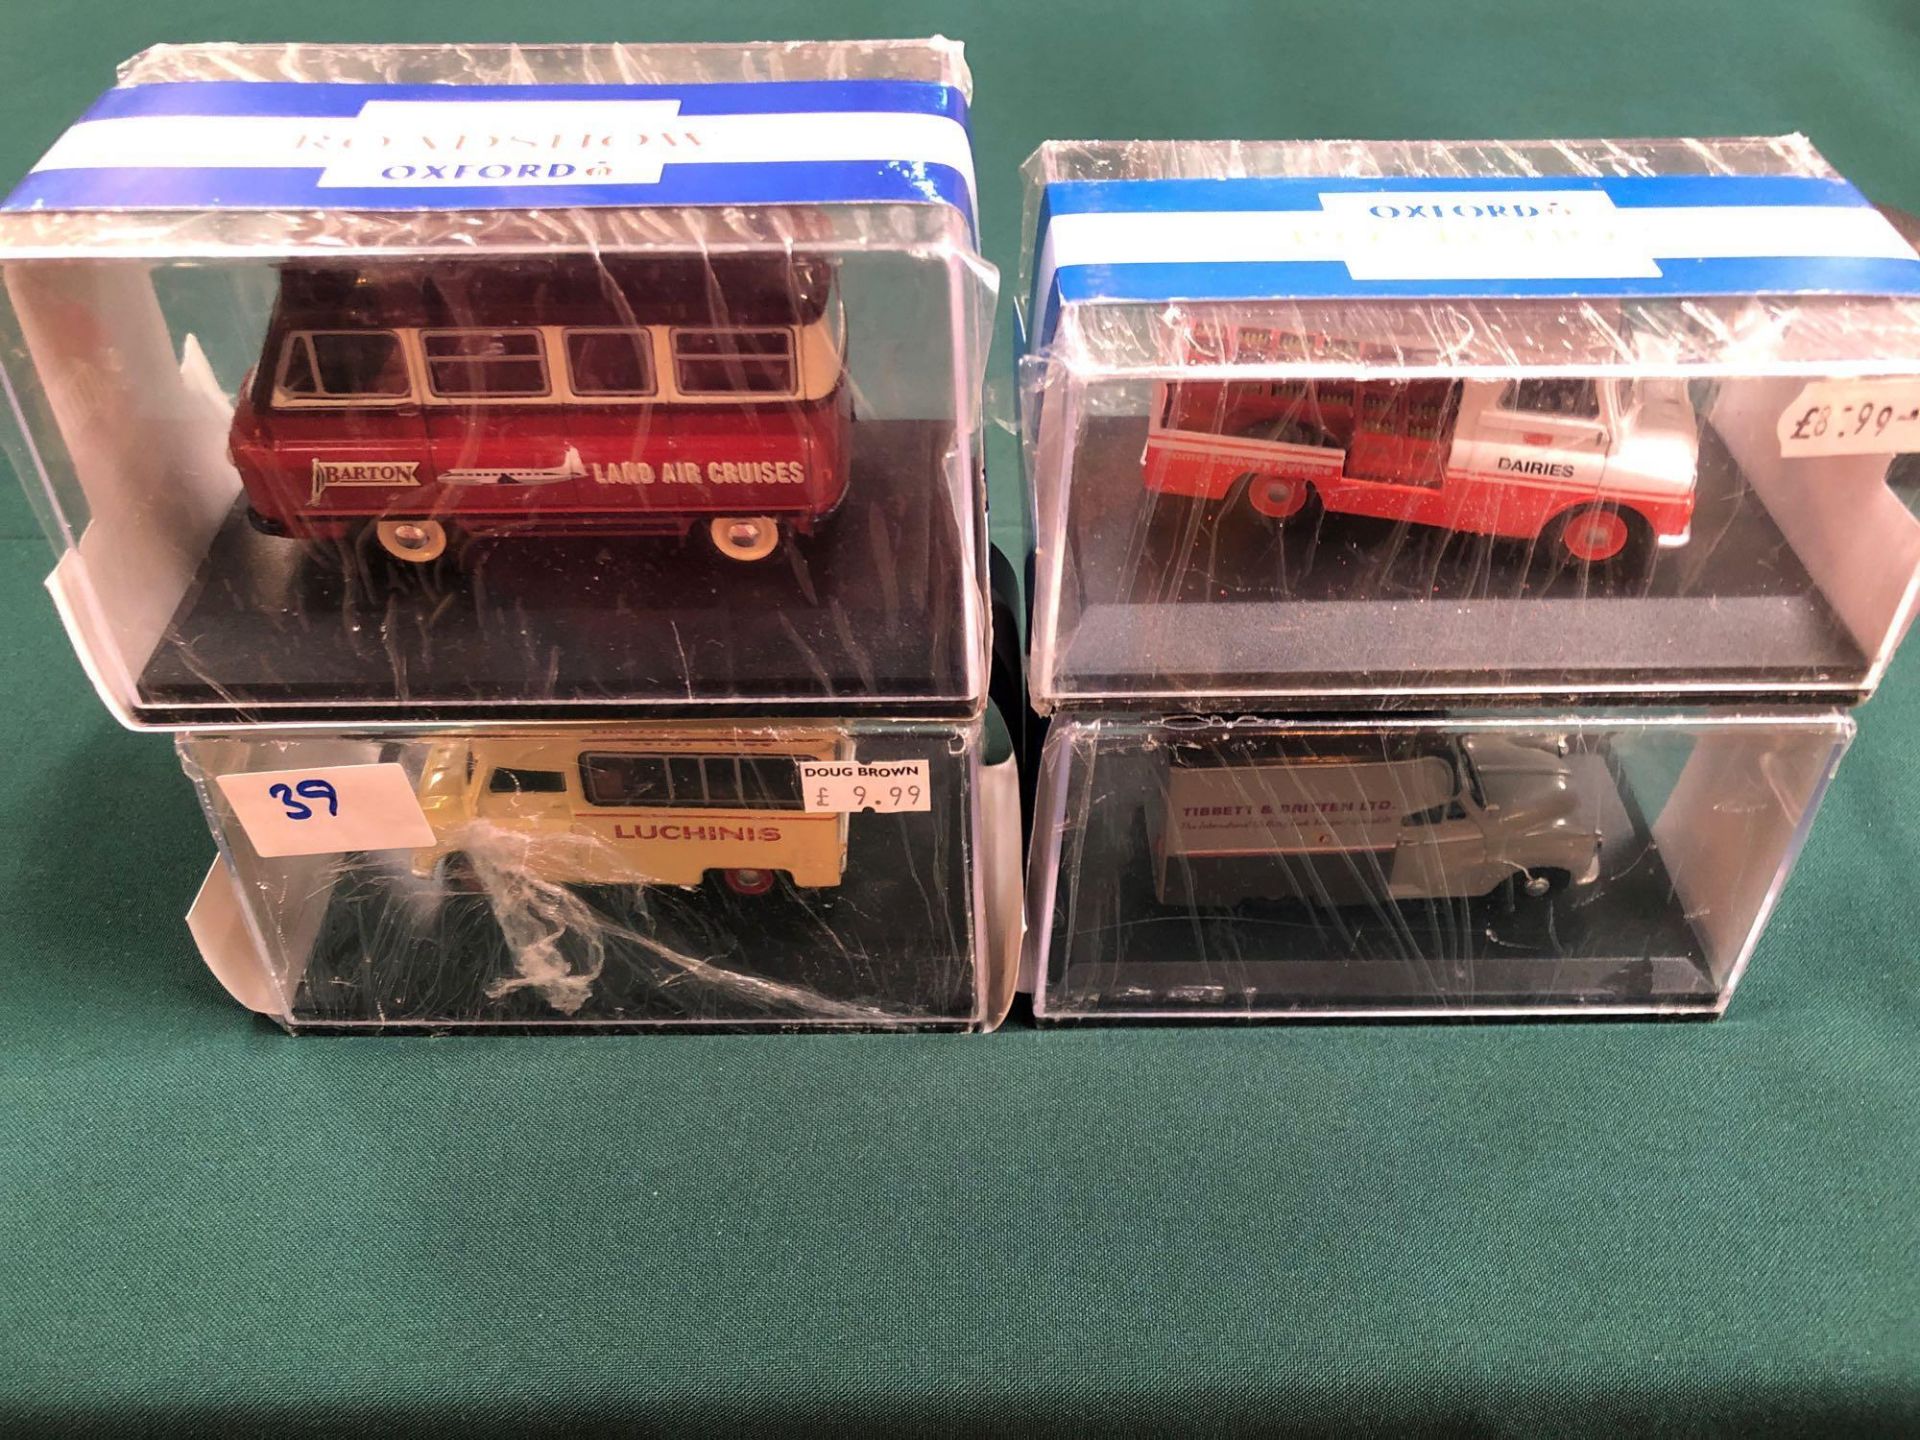 4x Oxford Diecast Models All On Display Boxes, Comprising Of; #CA001 Unigate Certificate 0835 Of